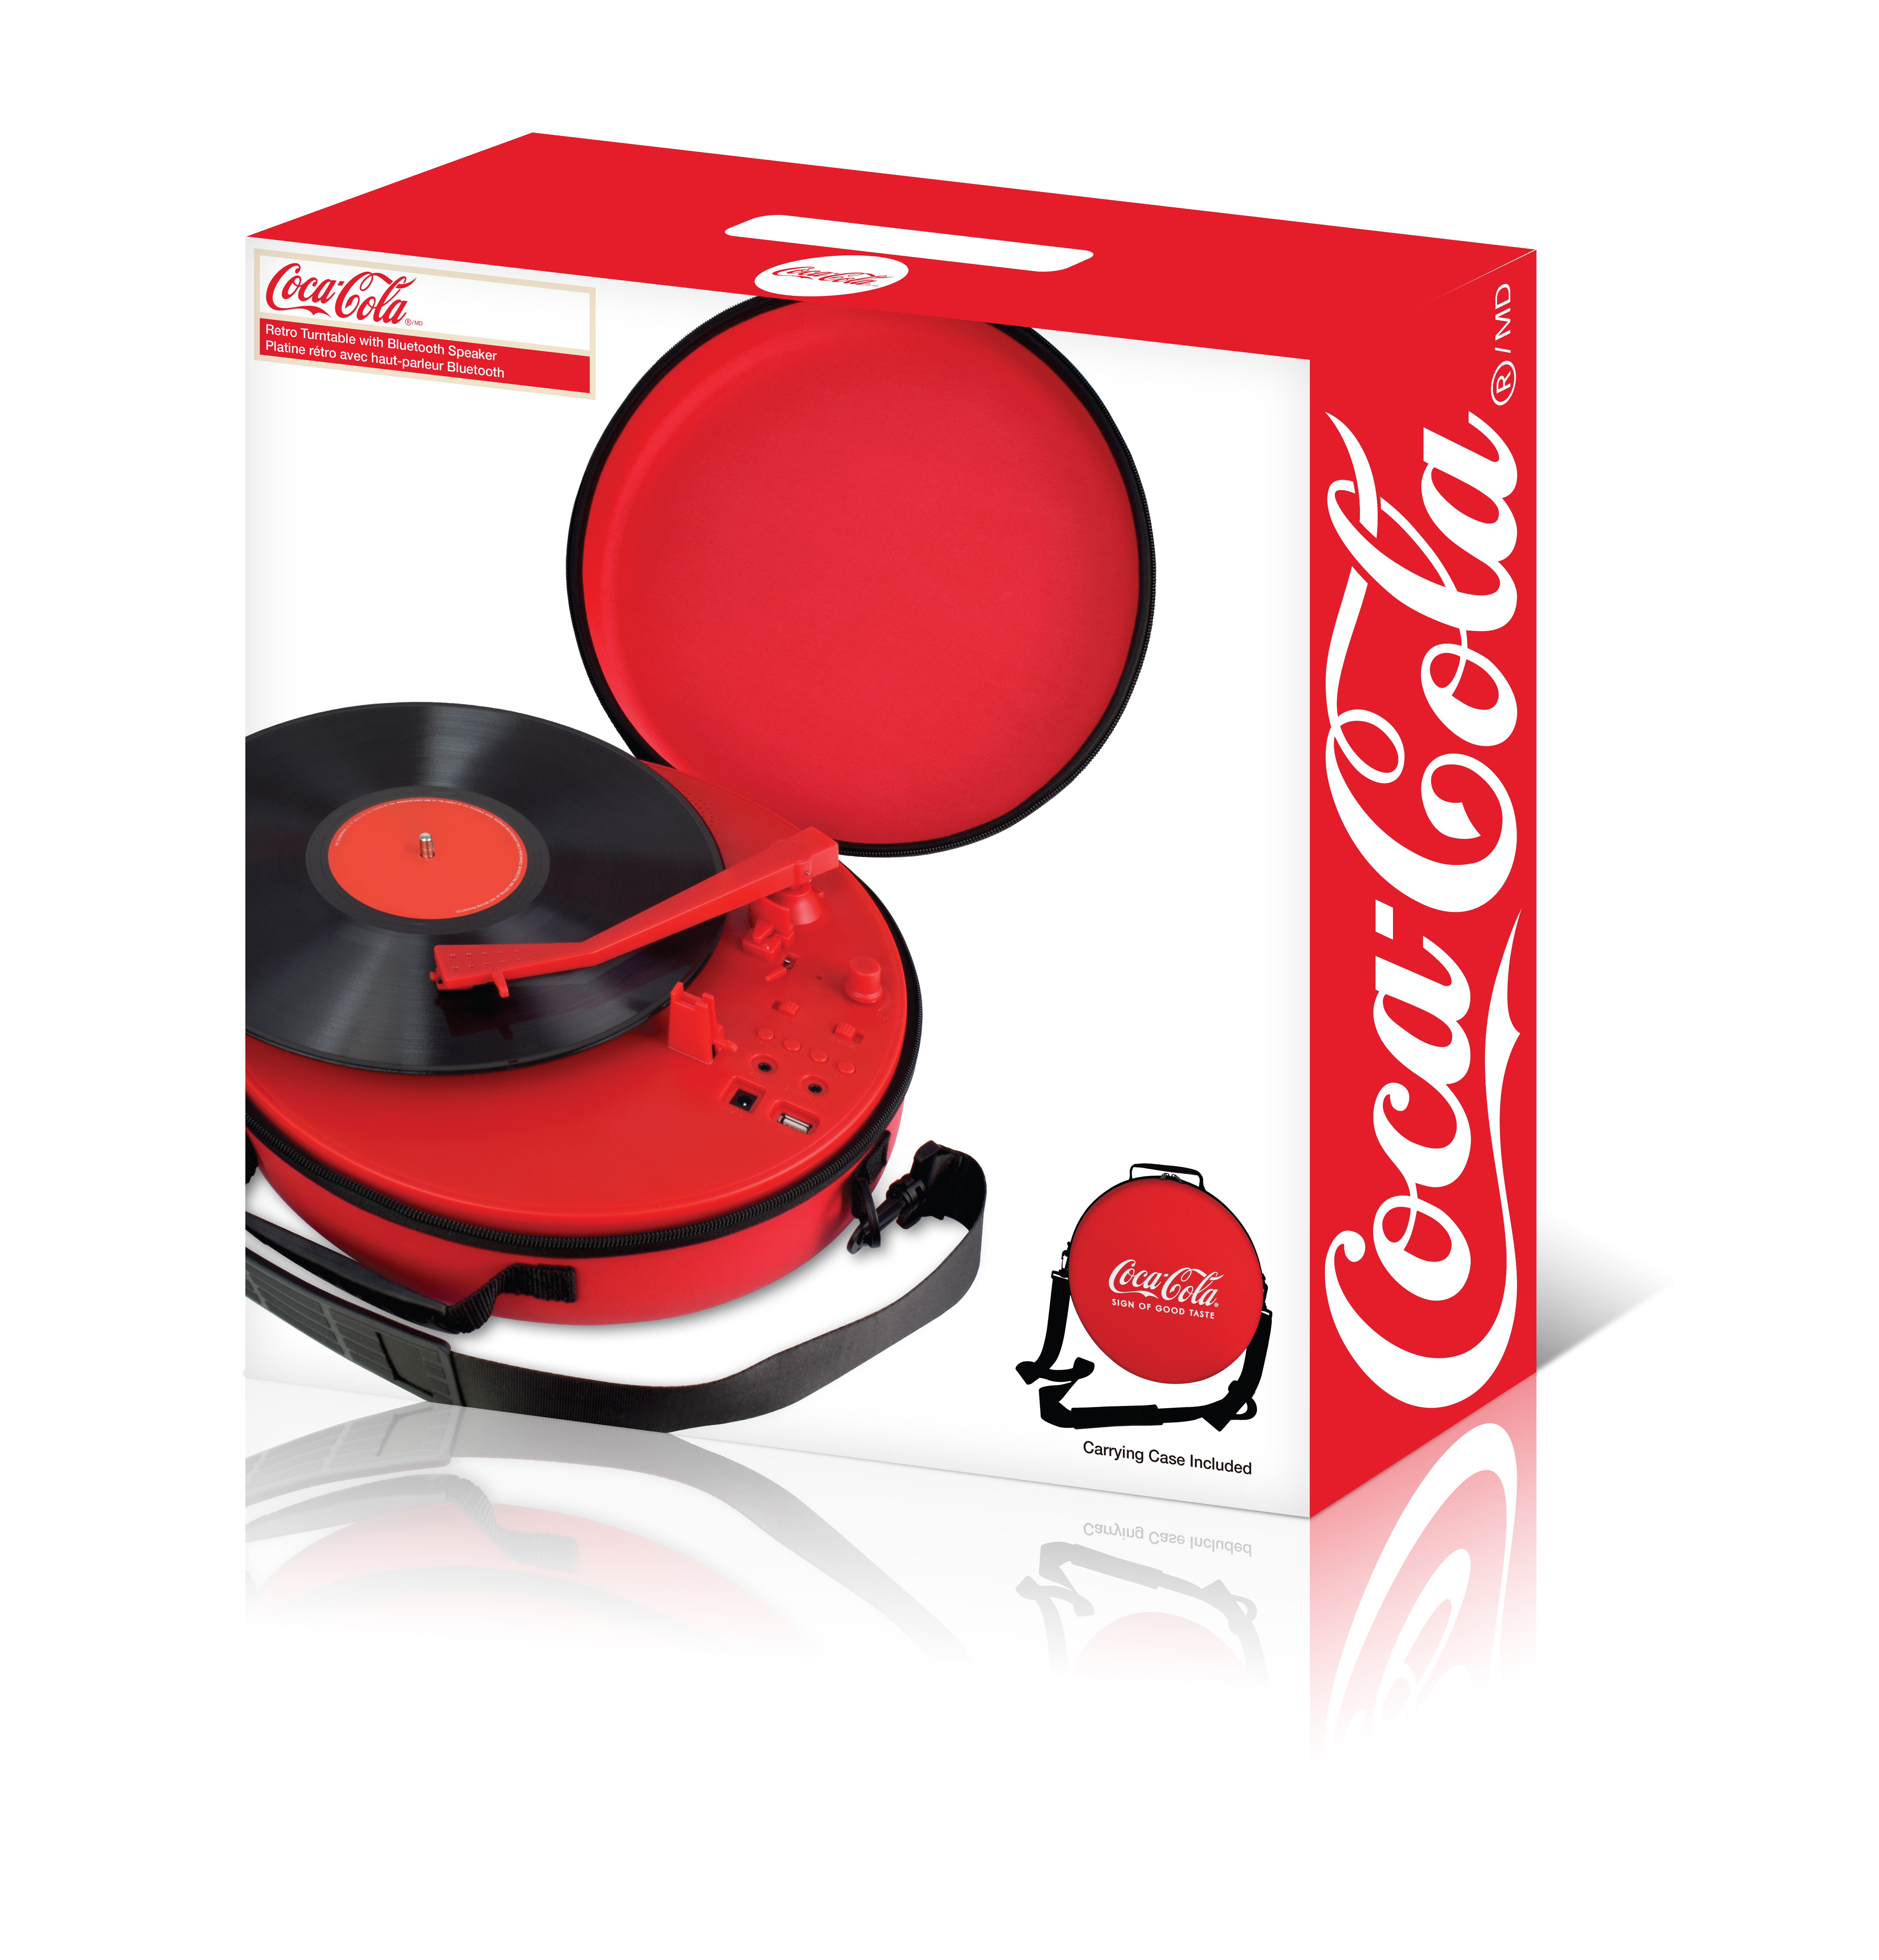 Coca Cola Retro Turntable with Wireless Speaker, 3 Different Playback Modes, 33S, 45S, 78S Playback Support, Portable Carry Case, Vintage Radio - image 4 of 10